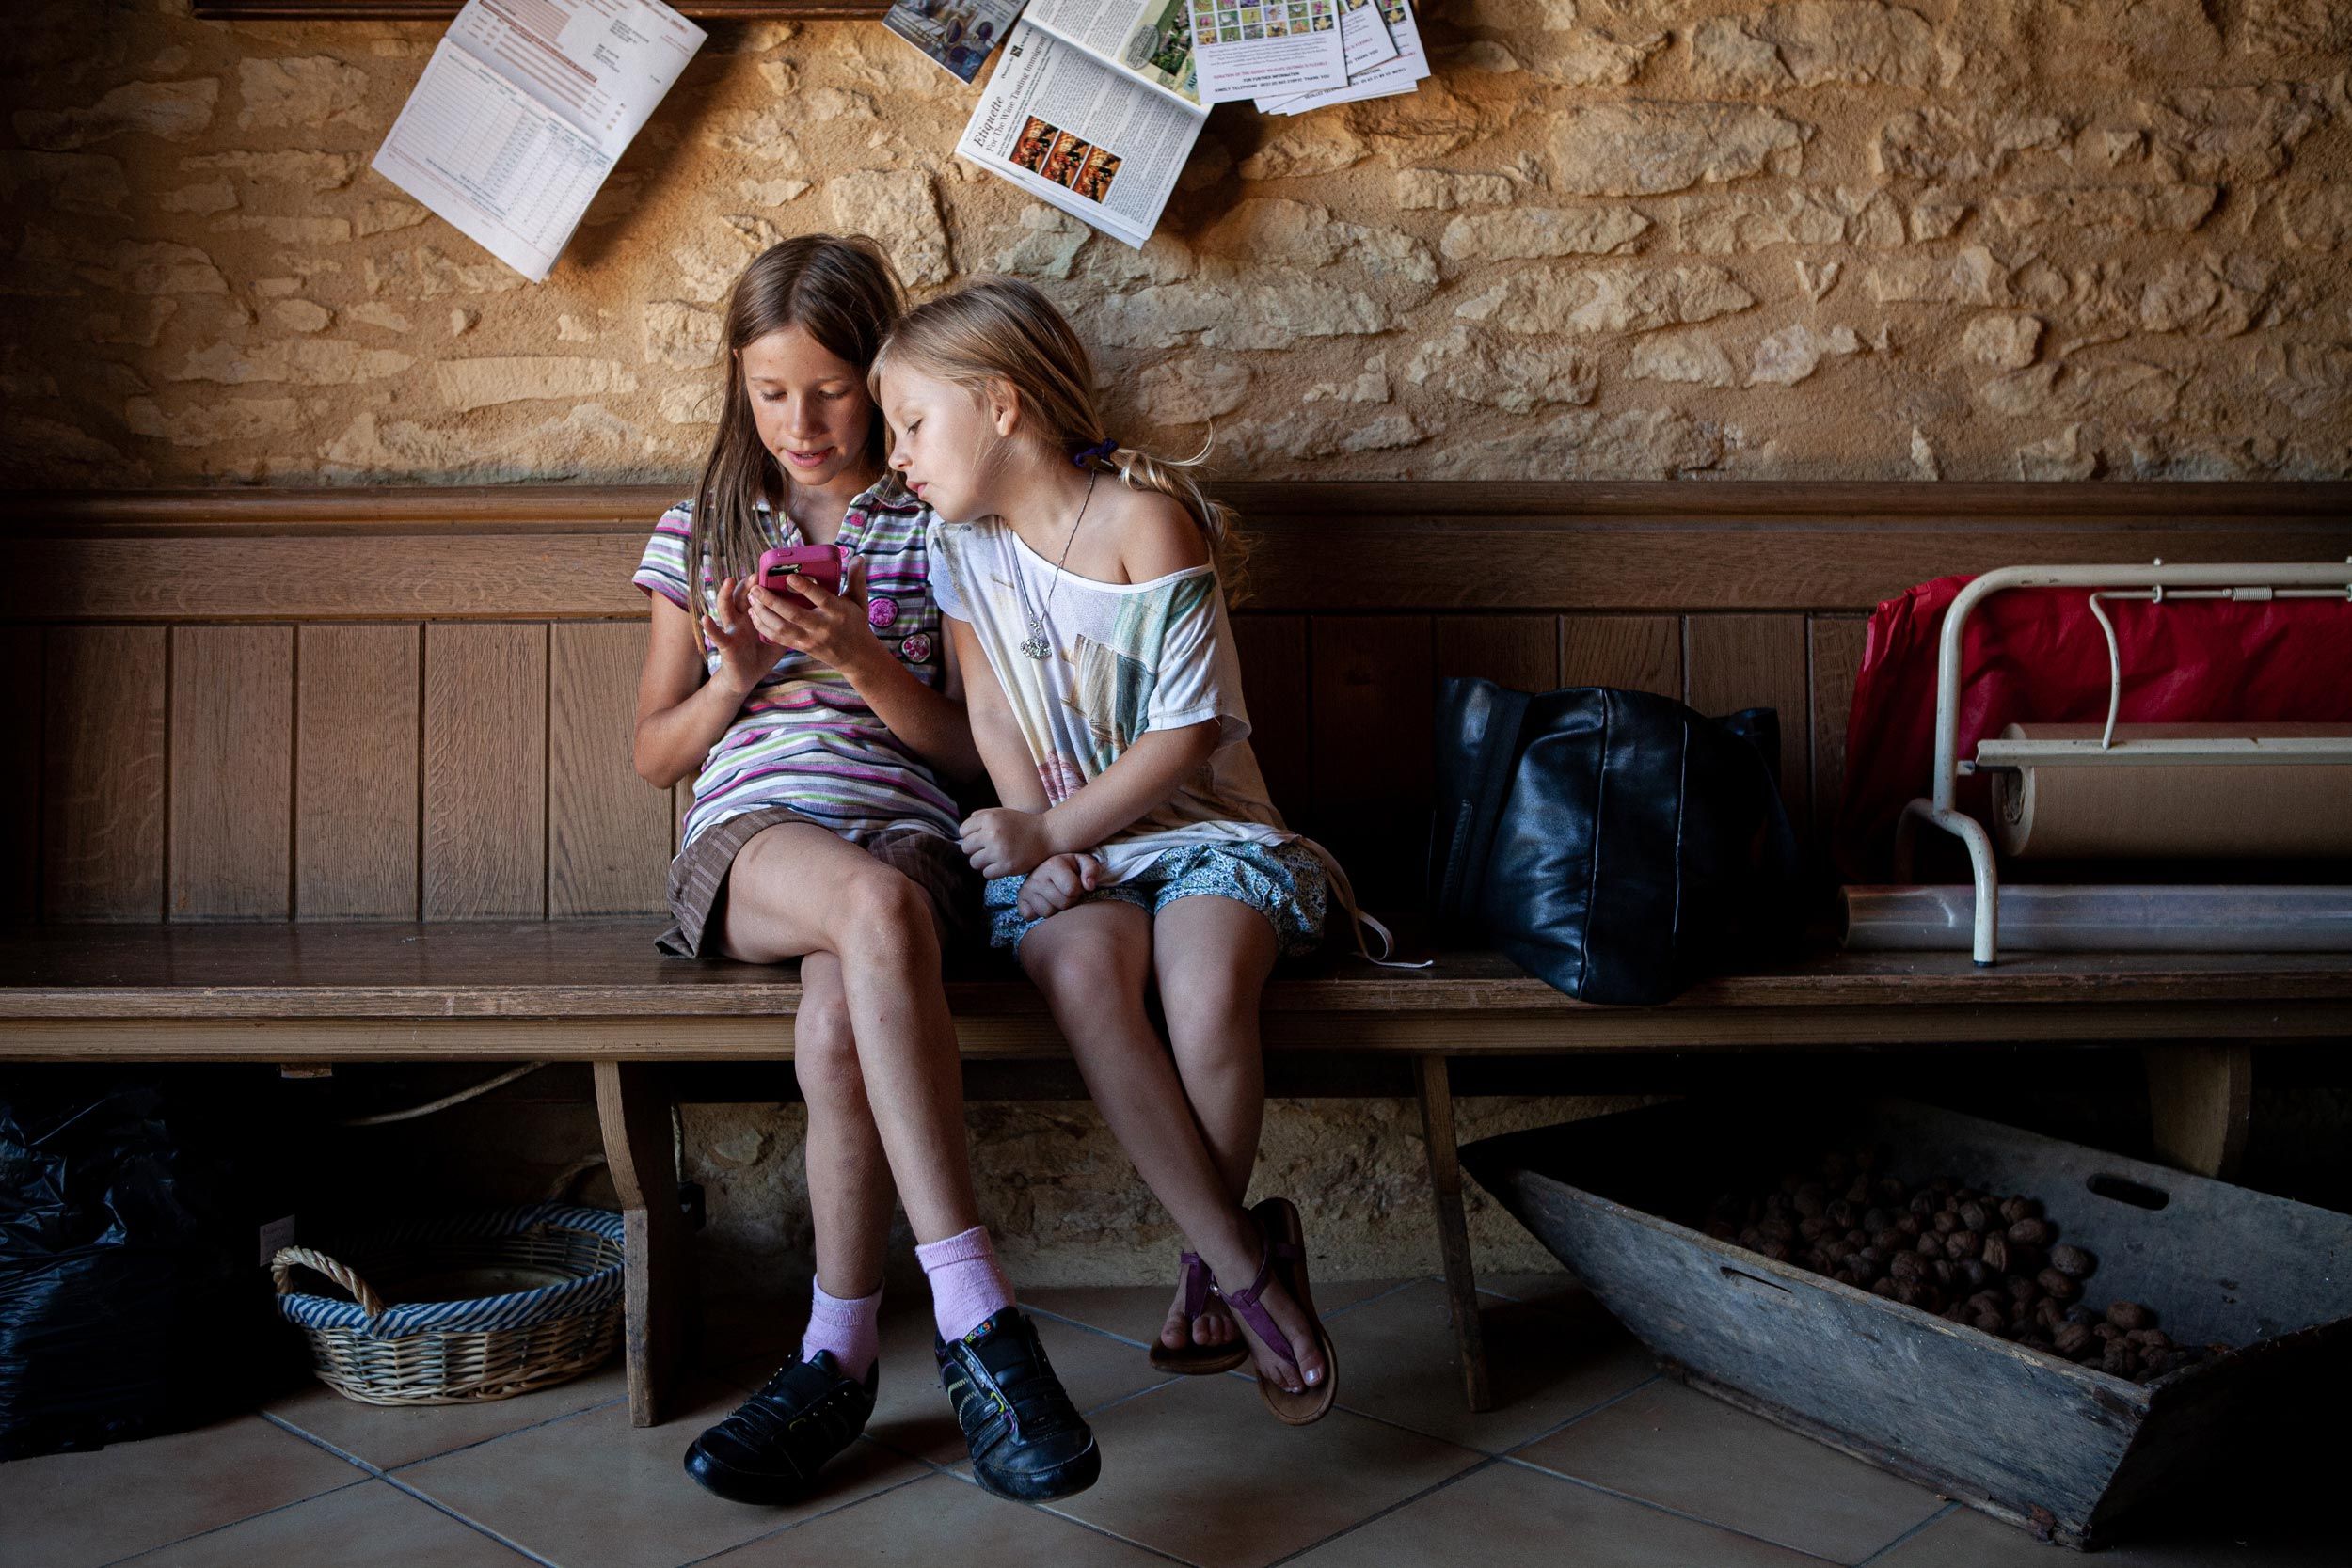 Young Girls Looking at a Phone